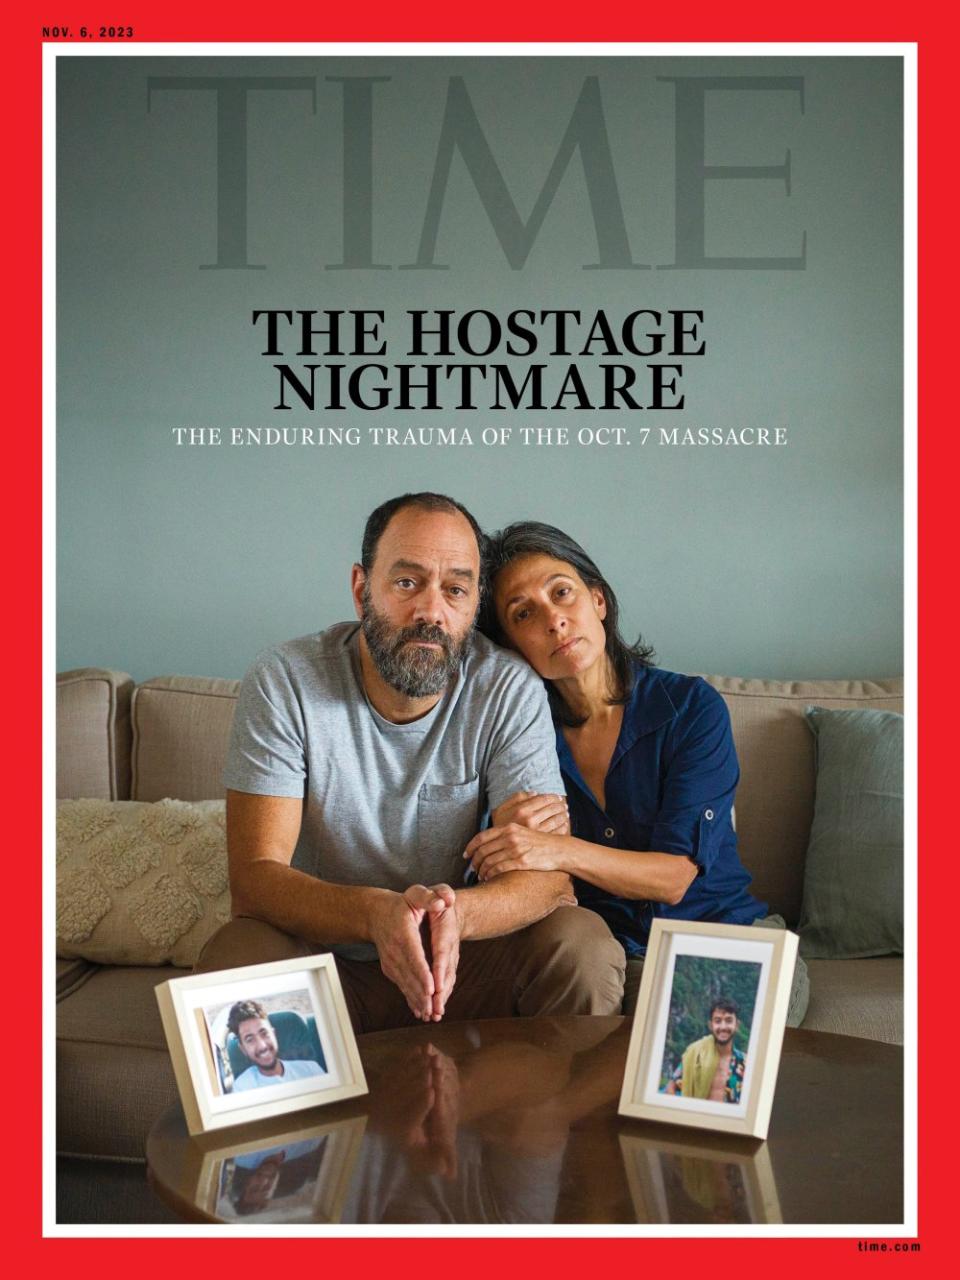 Jonathan Polin, left, and Rachel Goldberg in Jerusalem on Oct. 15. Their son Hersh Goldberg-Polin, 23, is missing.<span class="copyright">Photograph by Michal Chelbin for TIME</span>